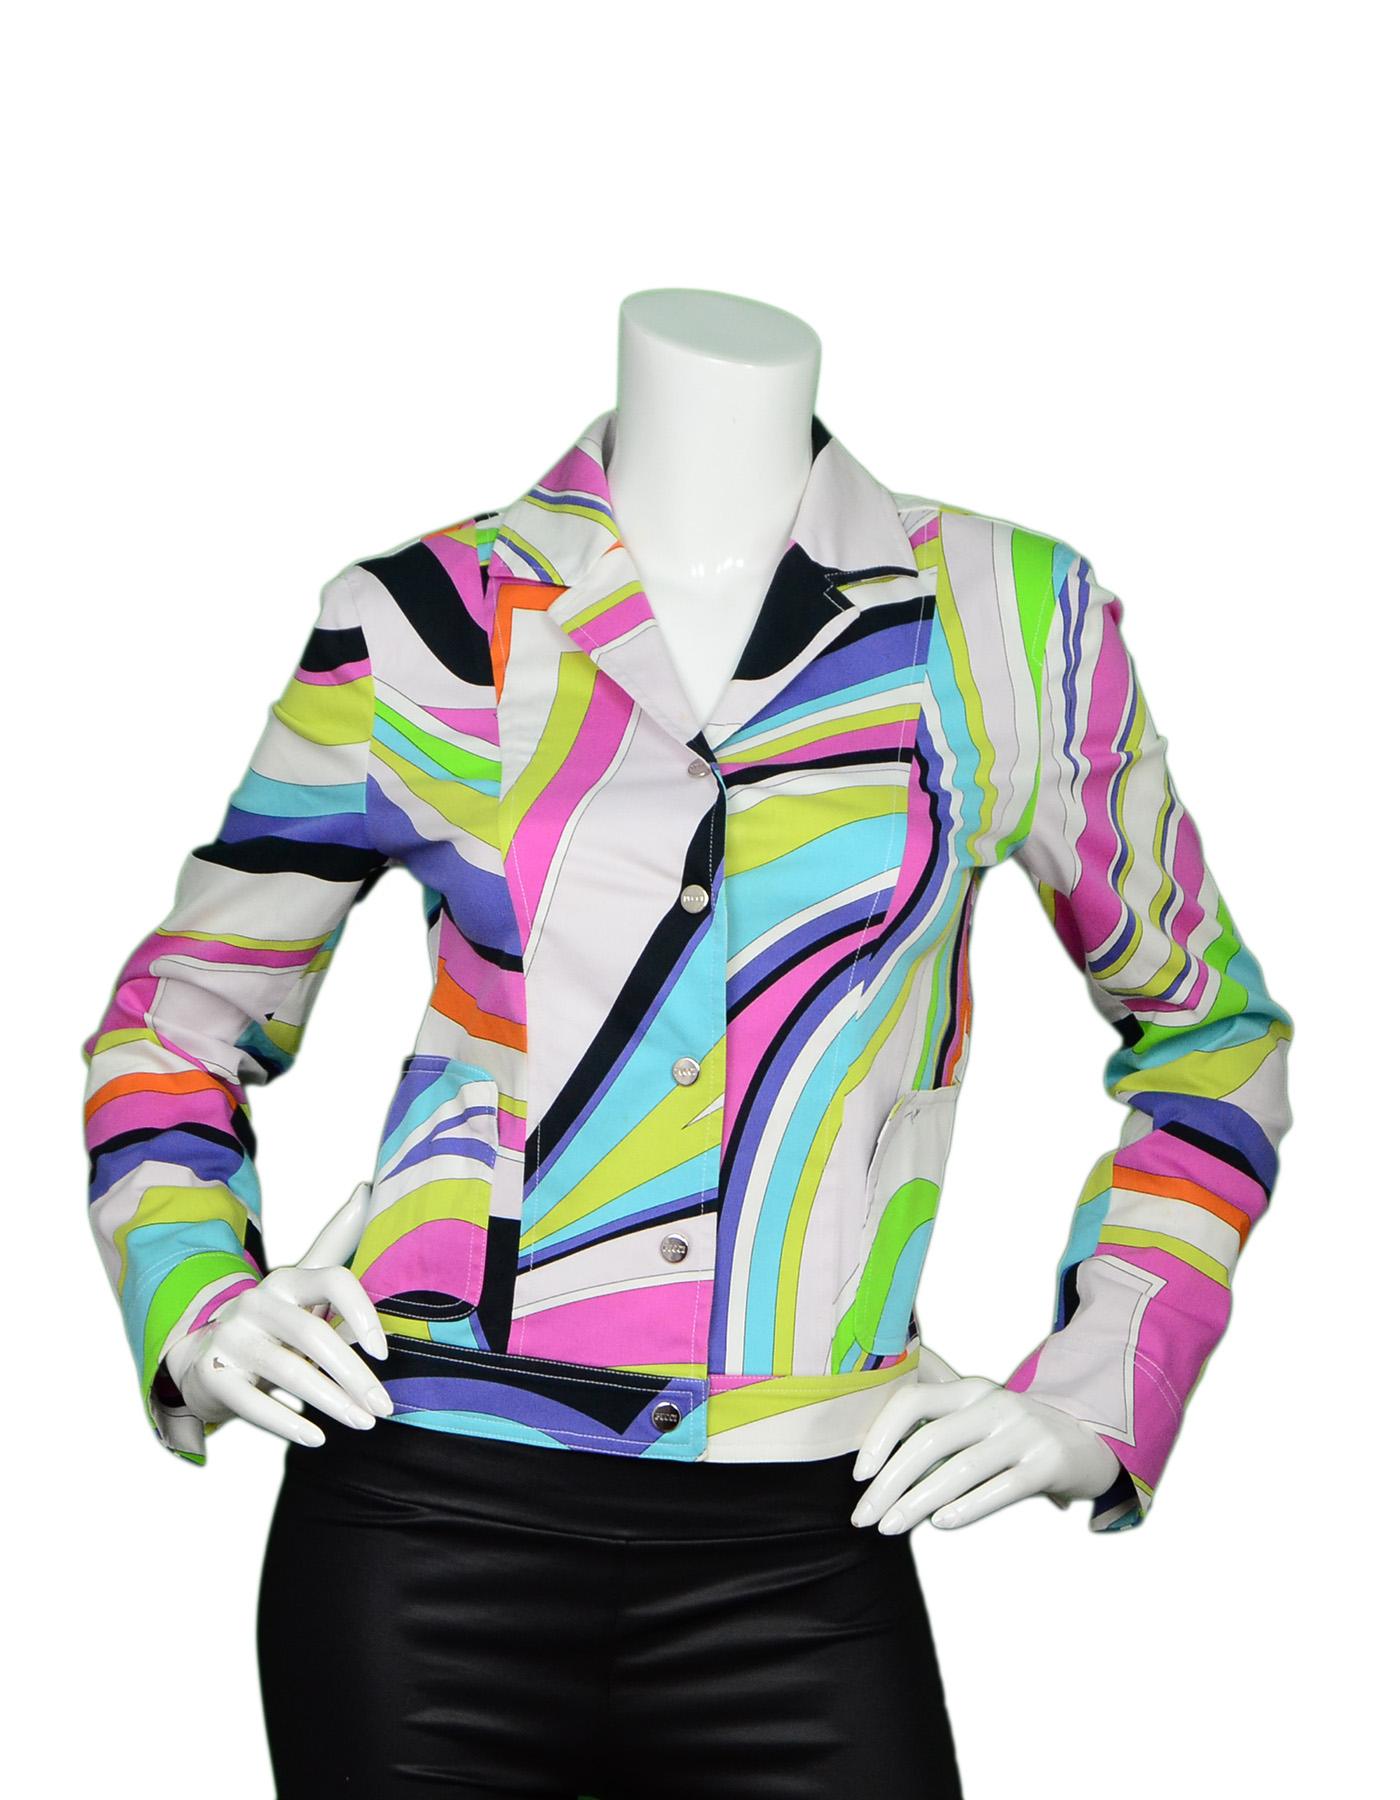 Emilio Pucci Multi-Color Cotton Long Sleeve Blazer/Jacket Sz 36

Made In: Italy
Color: Multicolor- white, pink, purple, teal. chartreuse 
Materials: 98% cotton, 2% elastane
Opening/Closure: Silvertone Pucci logo snaps
Overall Condition: Excellent